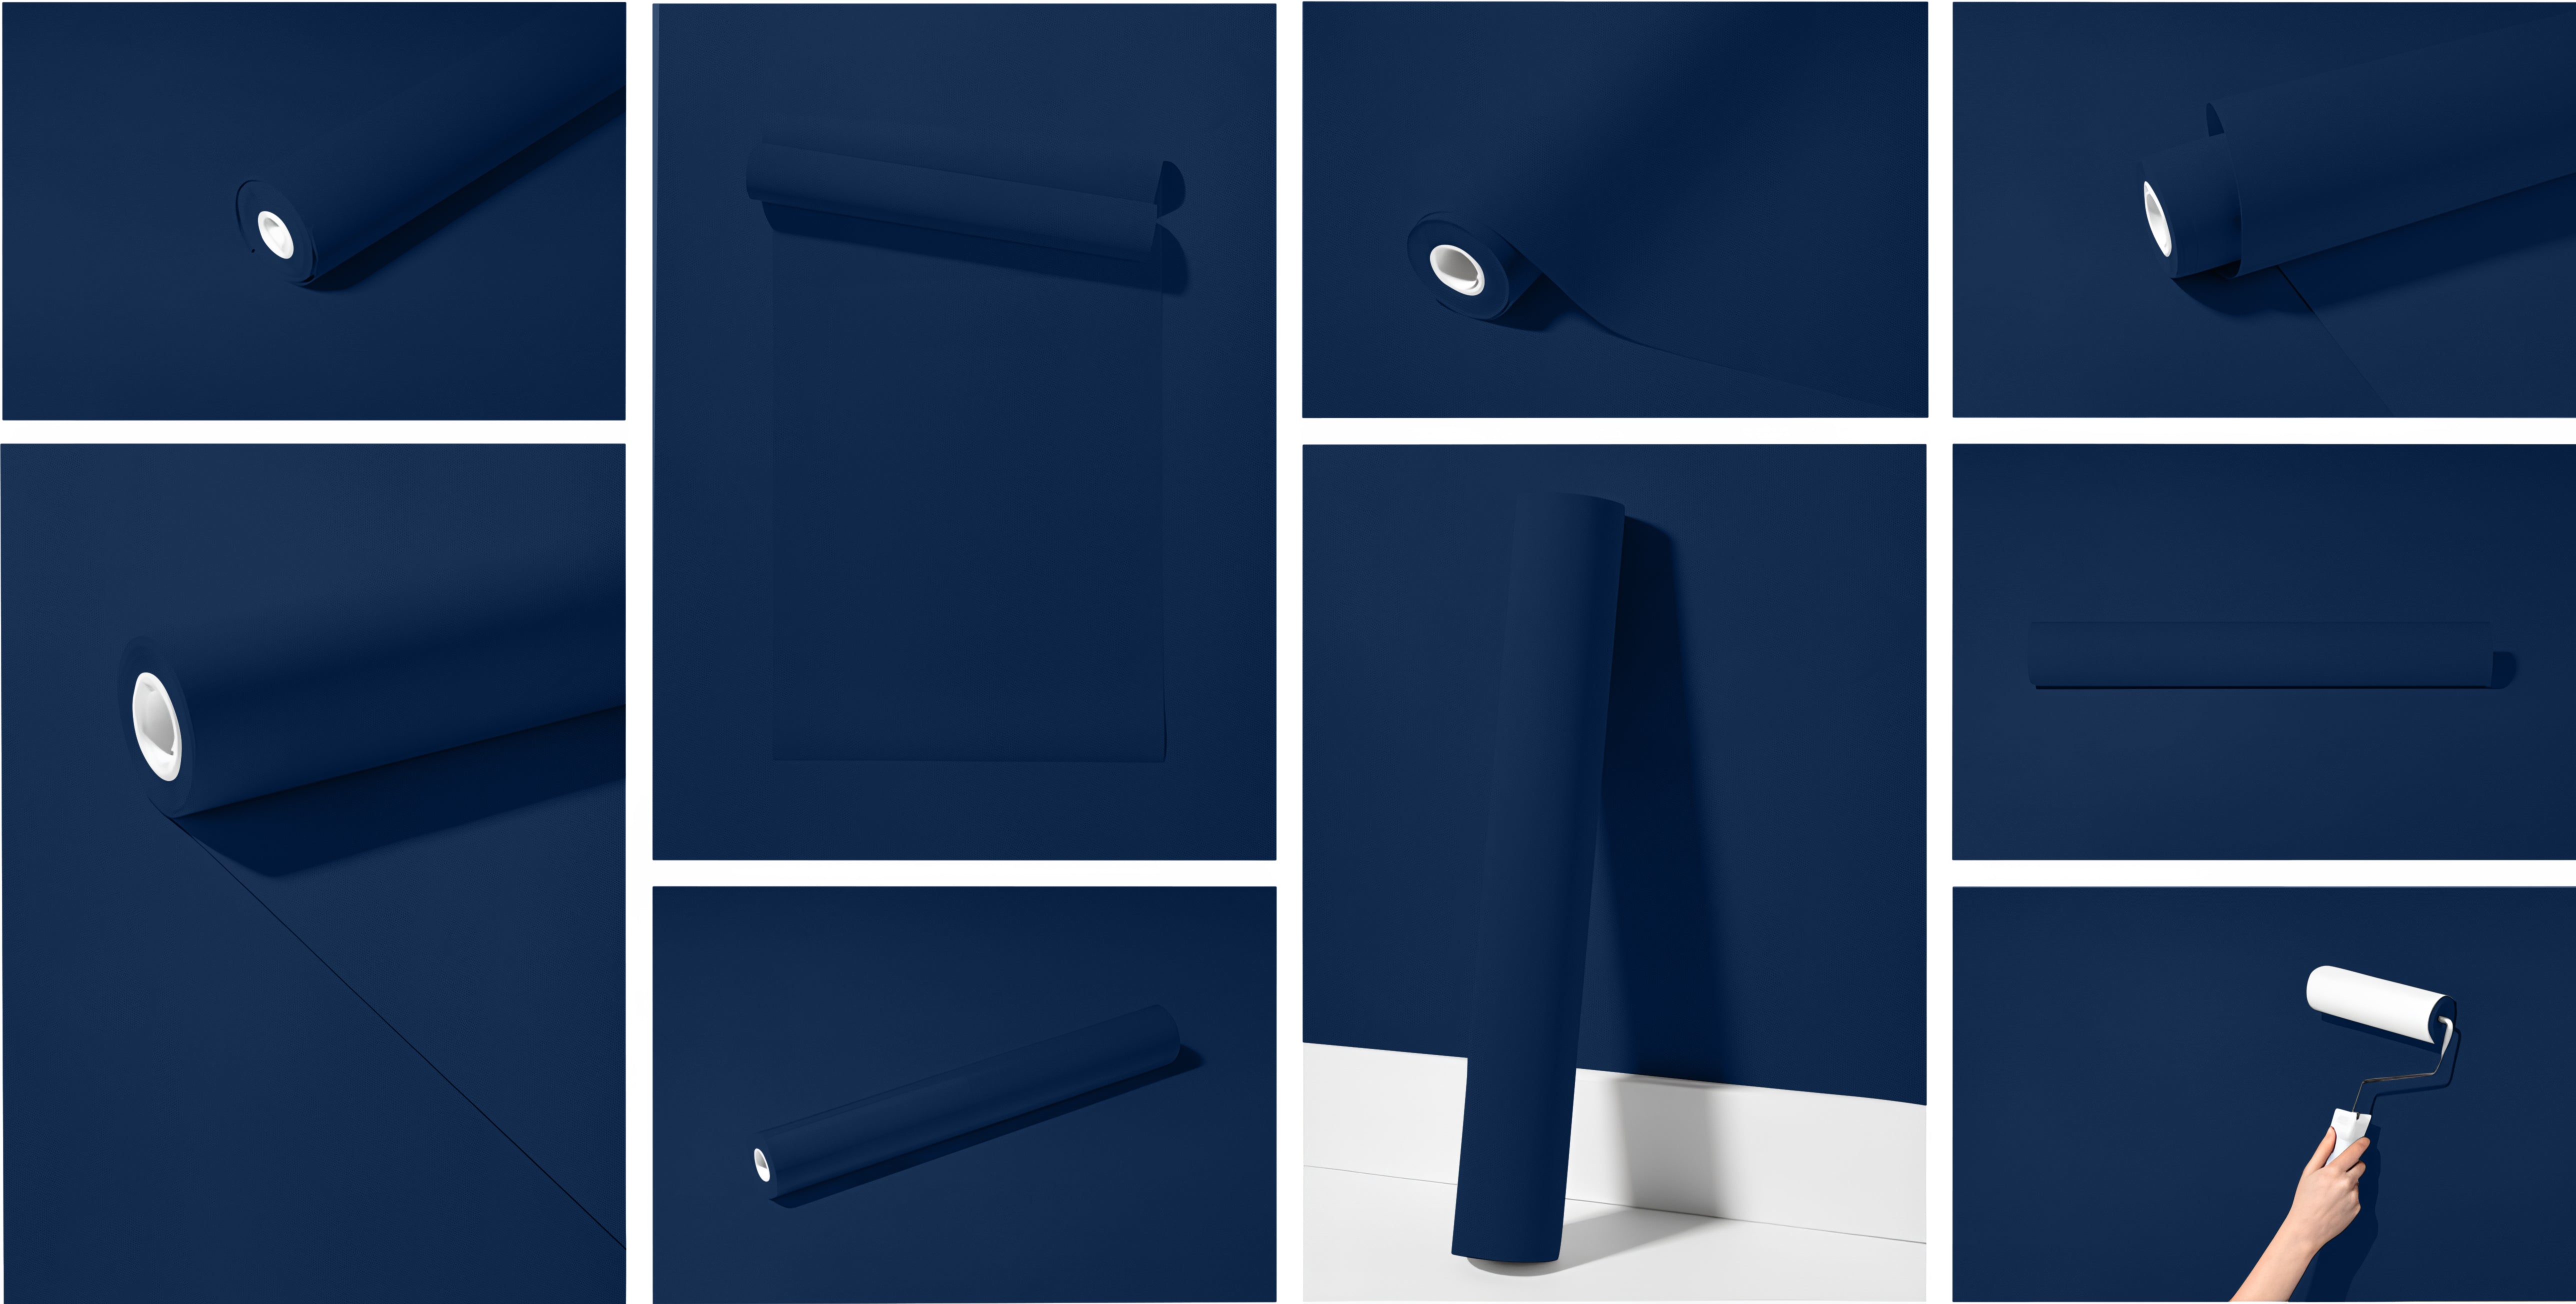 Peel & Stick Removable Re-usable Paint - Color RAL 5013 Cobalt Blue - offRAL™ - RALRAW LLC, USA